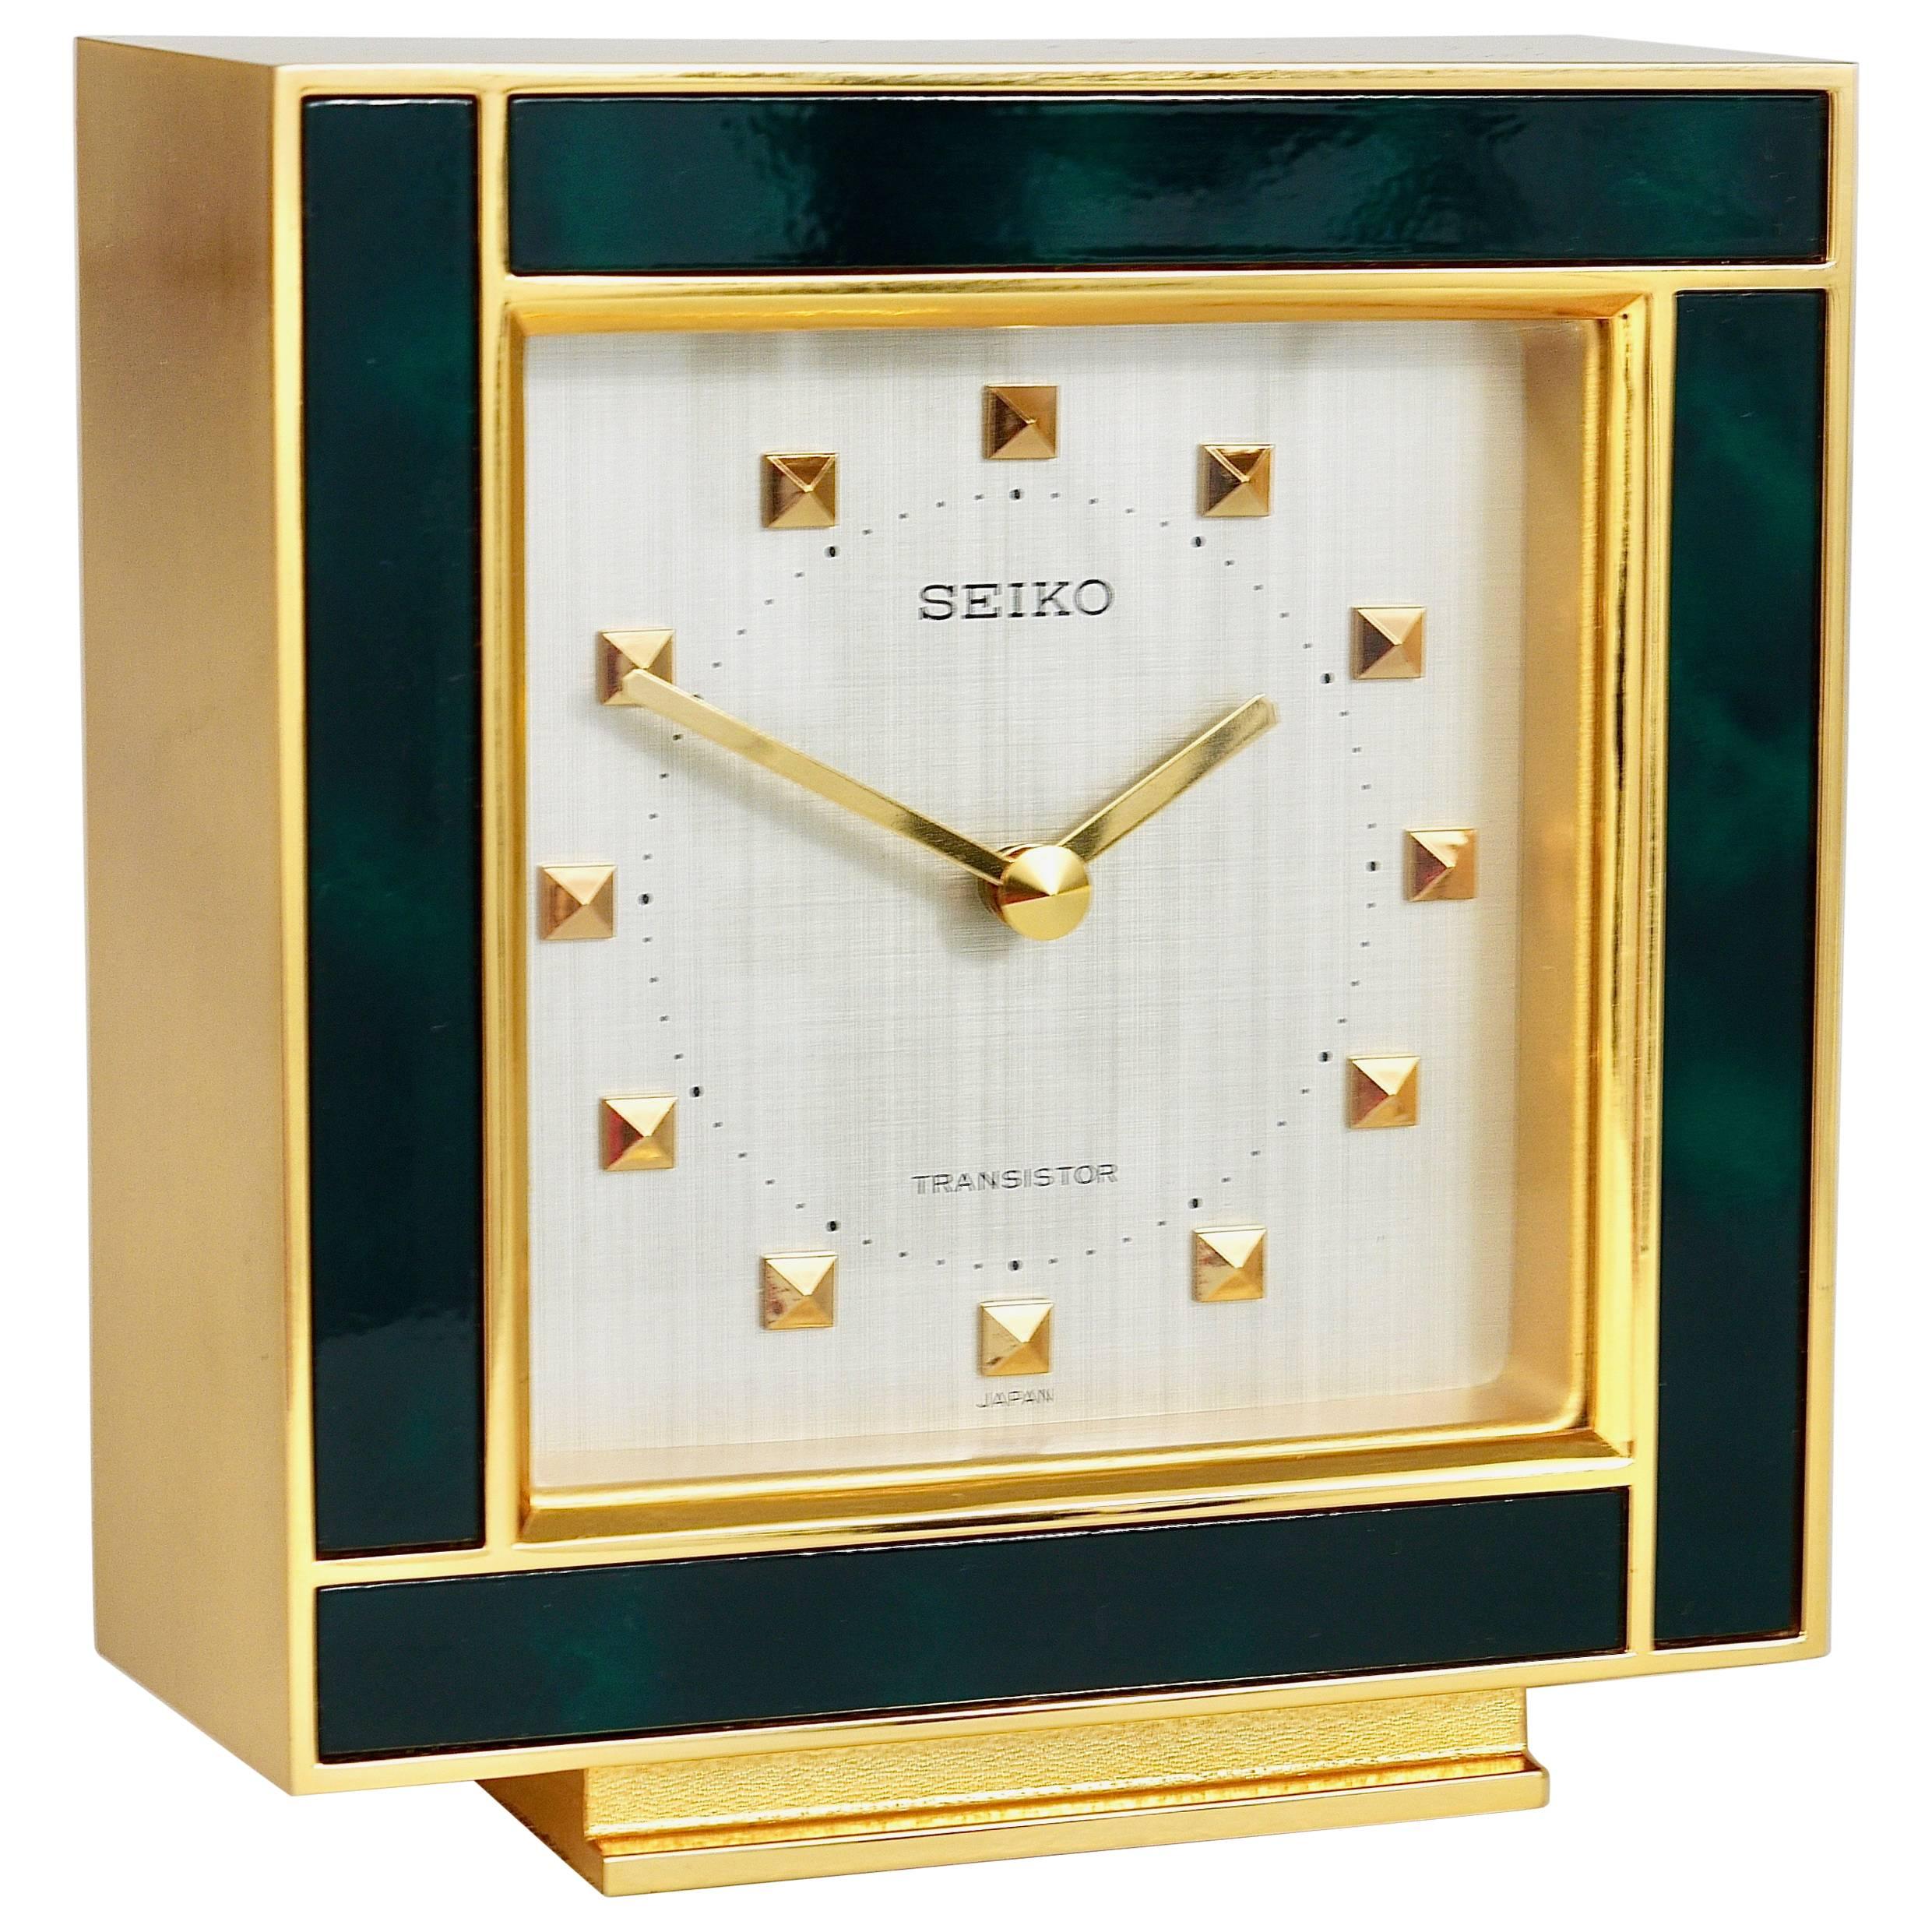 Beautiful Gold and Green Hollywood Regency Table Clock, Seiko, 1970s